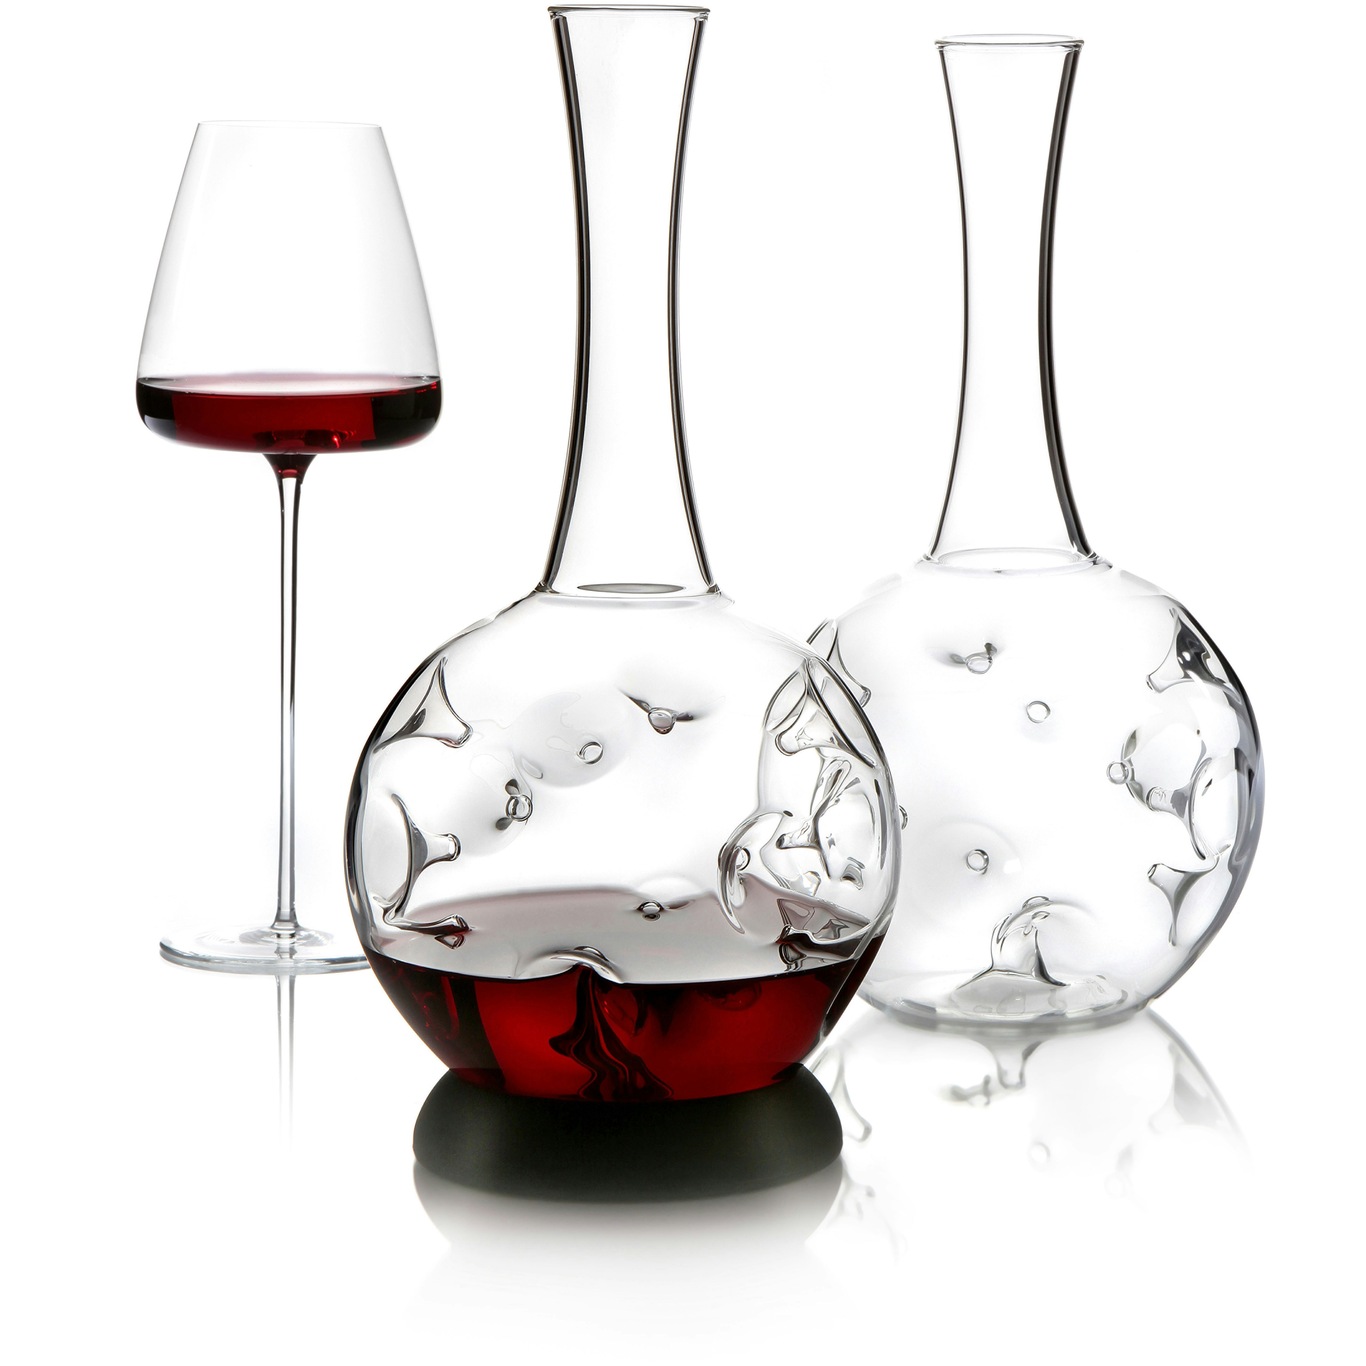 8 Best Wine Decanters and Carafes to buy in Australia in 2023 - Drinks 